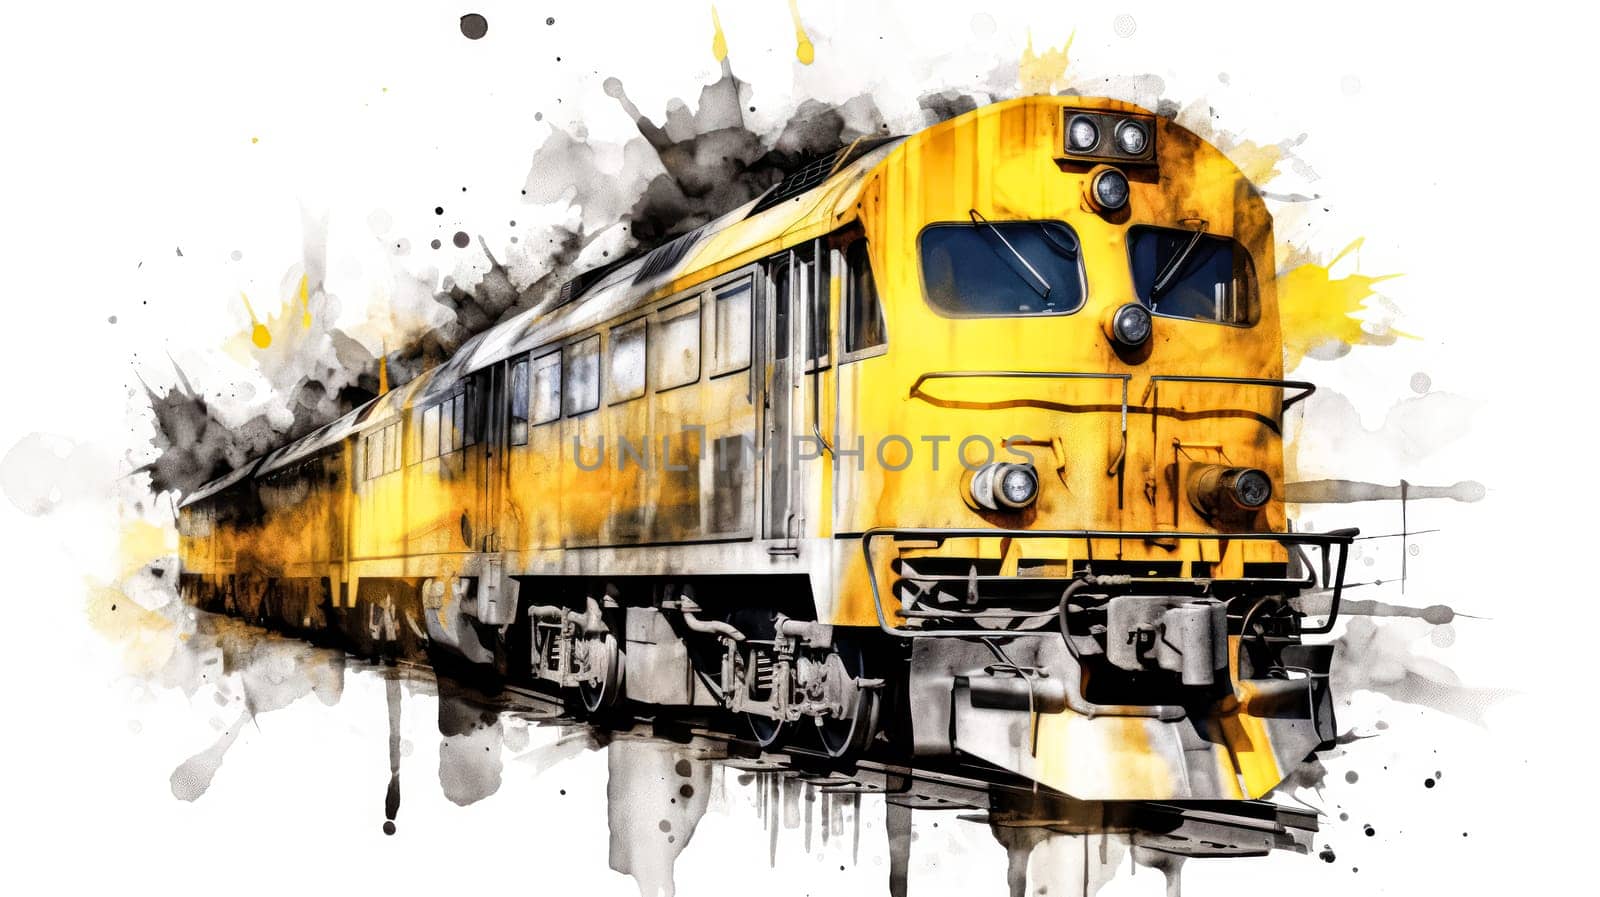 A charming watercolor sketch of a train with yellow gray lines, capturing the nostalgia and adventure of rail travel in artistic detail.